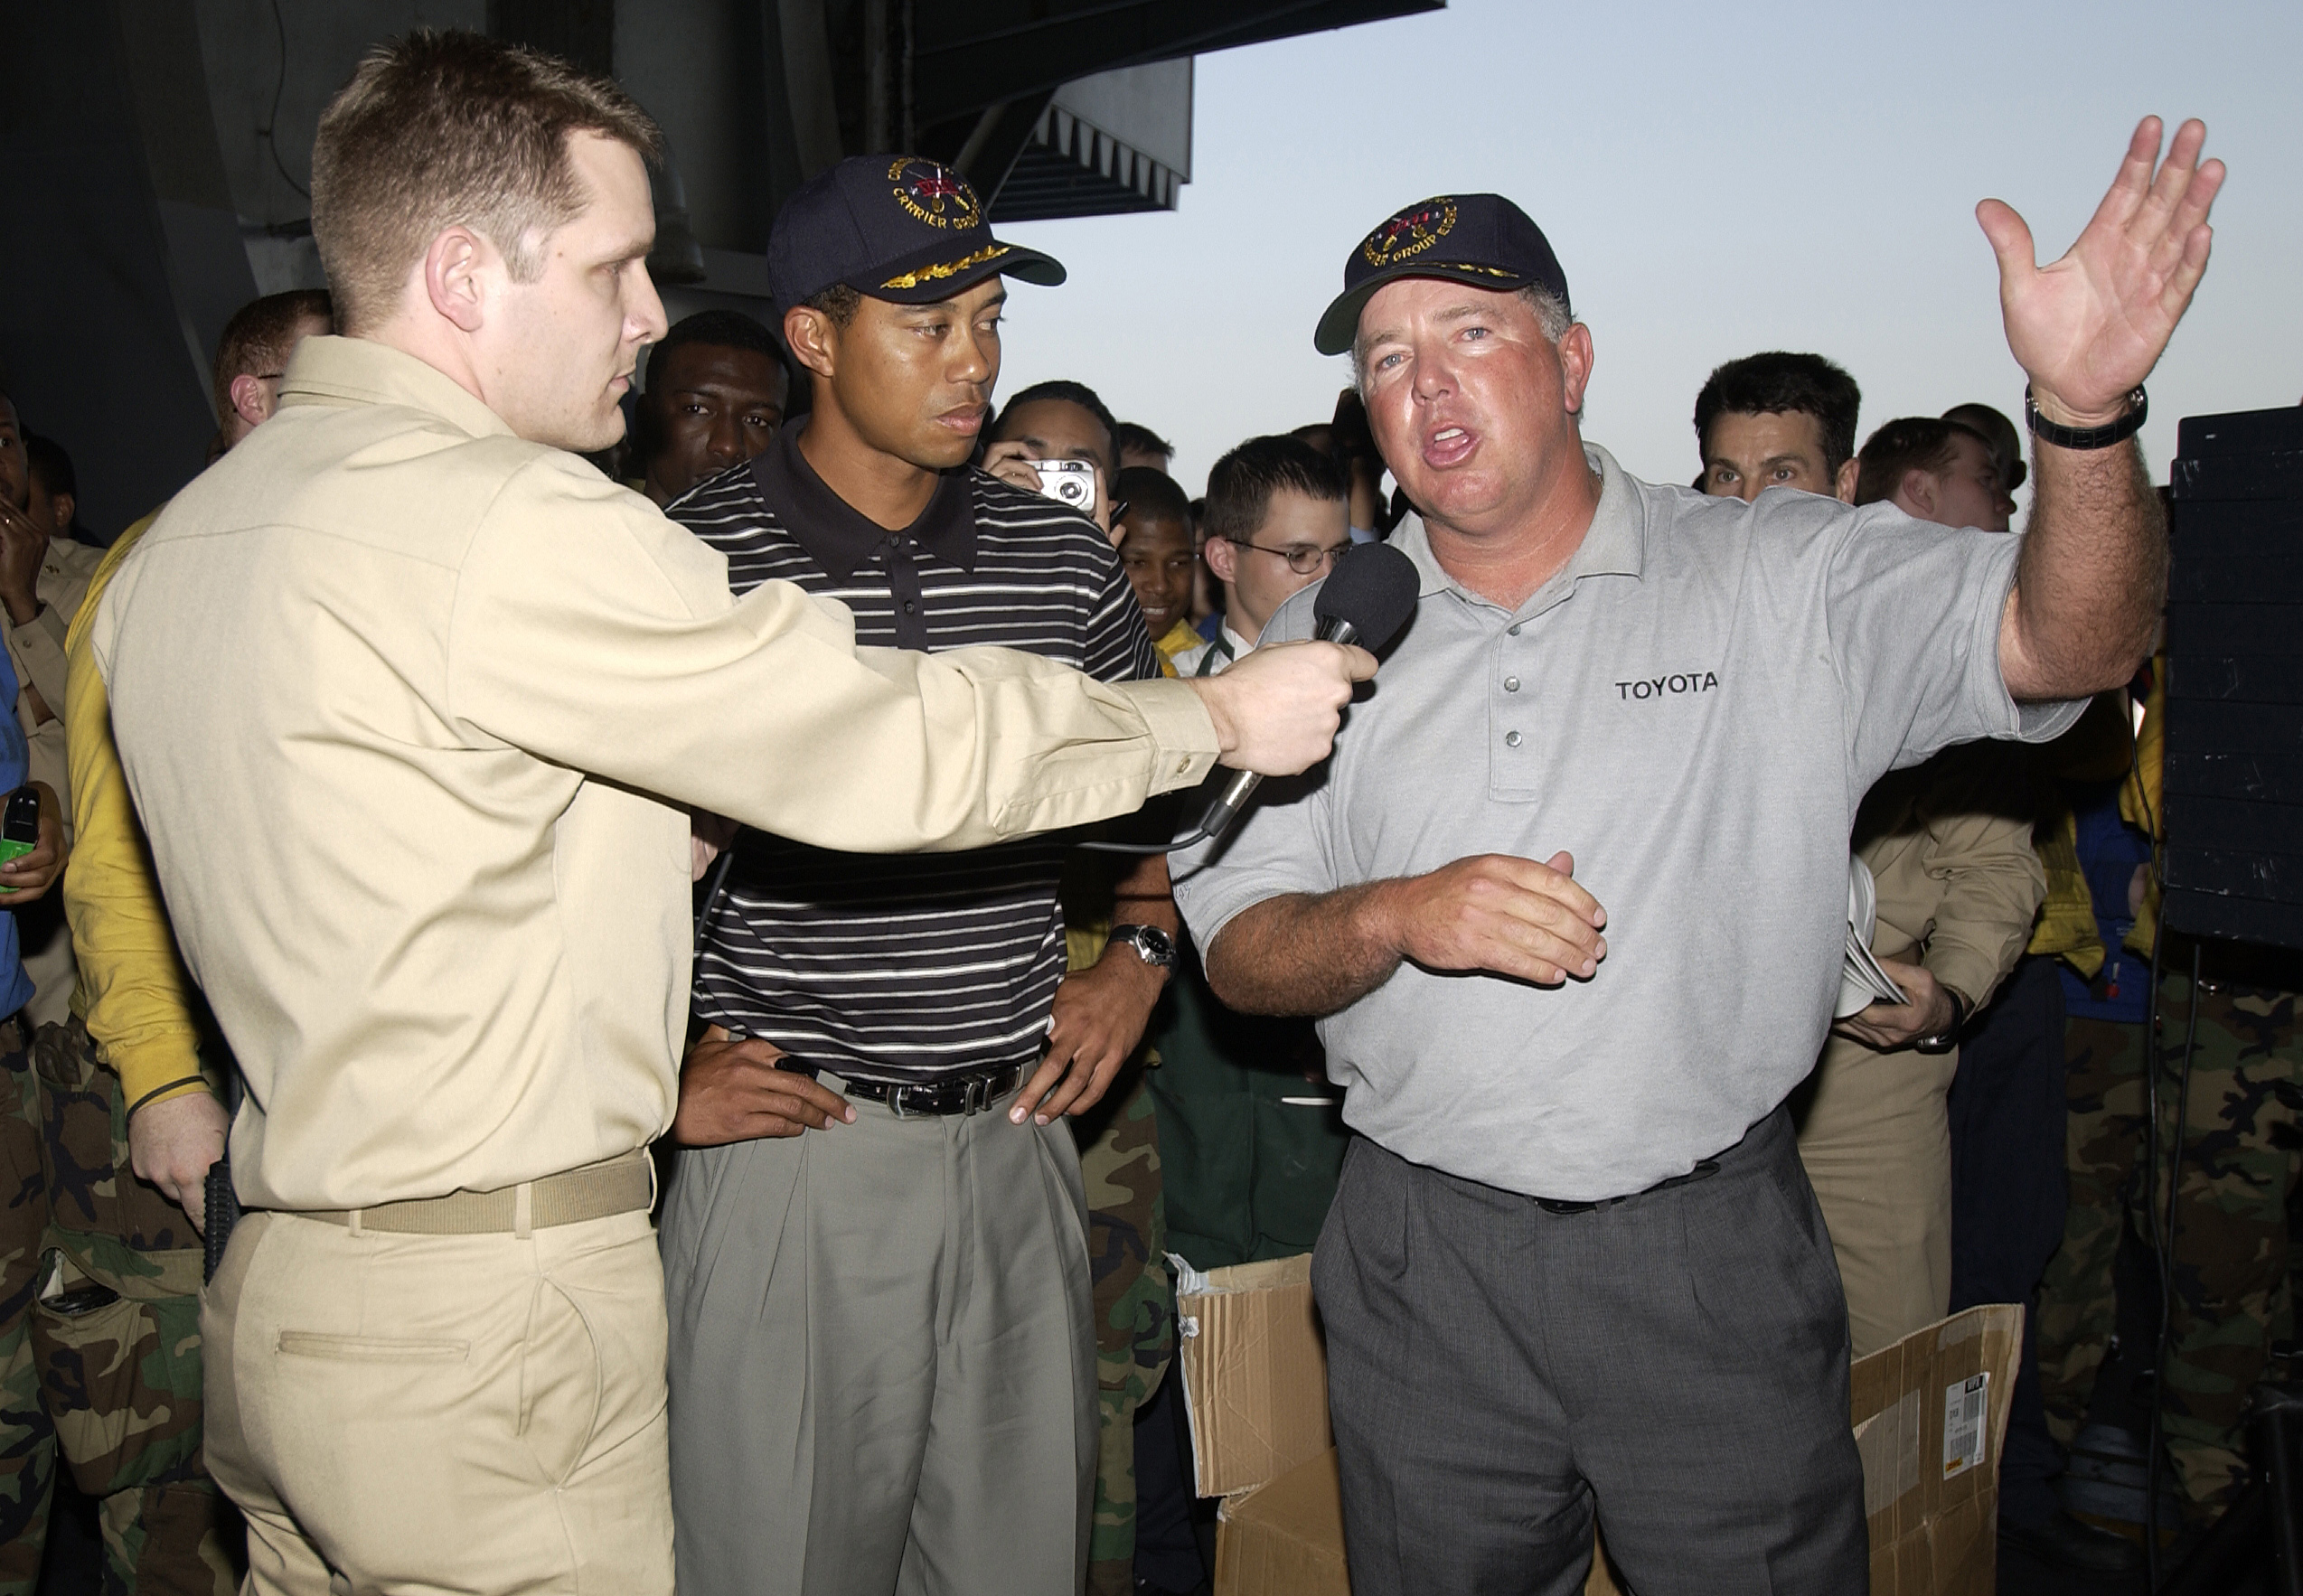 US Navy 040303-N-5319A-004 Professional golfers Tiger Woods and Mark O'Mara speak to the crew in the hanger bay of the nuclear powered aircraft carrier USS George Washington (CVN 73)